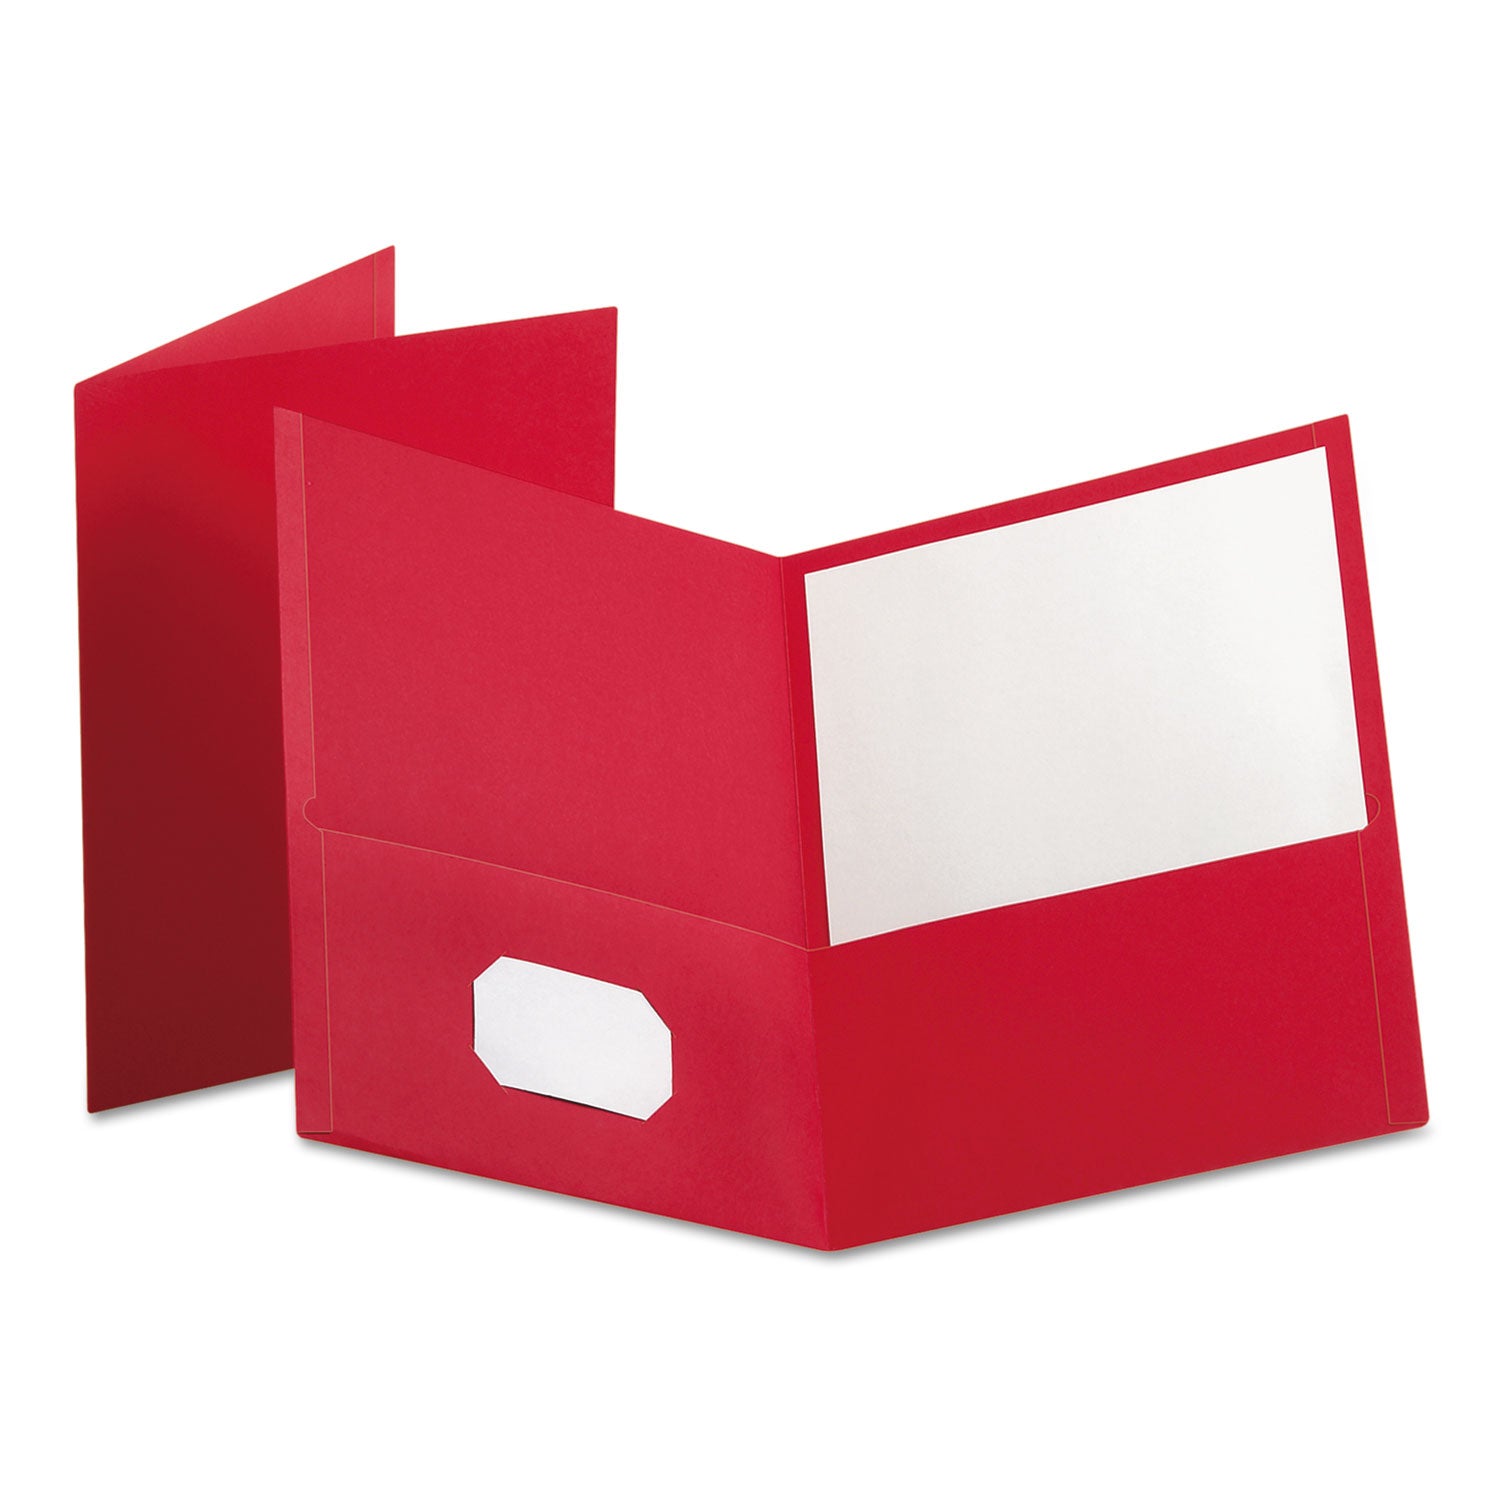 Twin-Pocket Folder, Embossed Leather Grain Paper, 0.5" Capacity, 11 x 8.5, Red, 25/Box - 